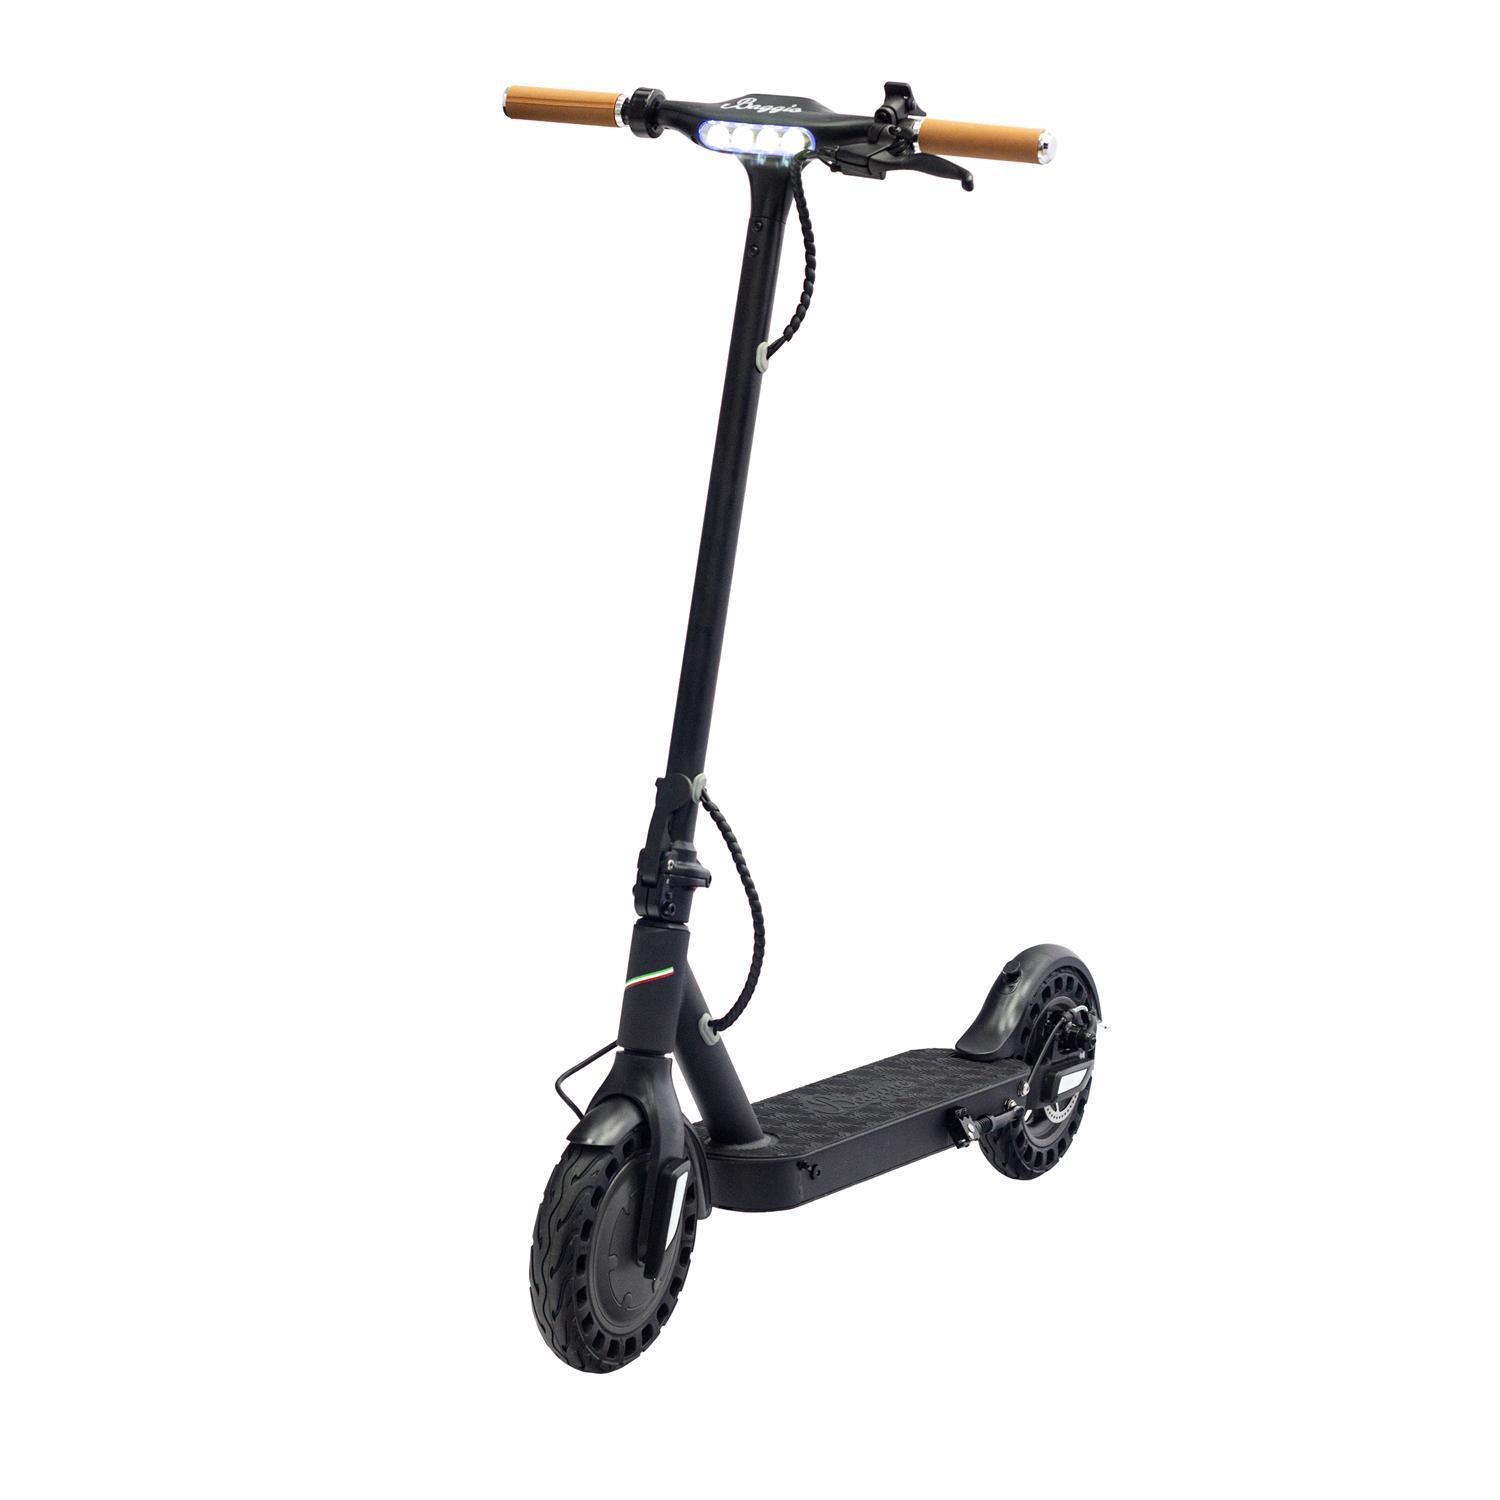 Trottinette Smartgyro Xtreme Baggio 10 - Noir - Scooter sports taille UNICA